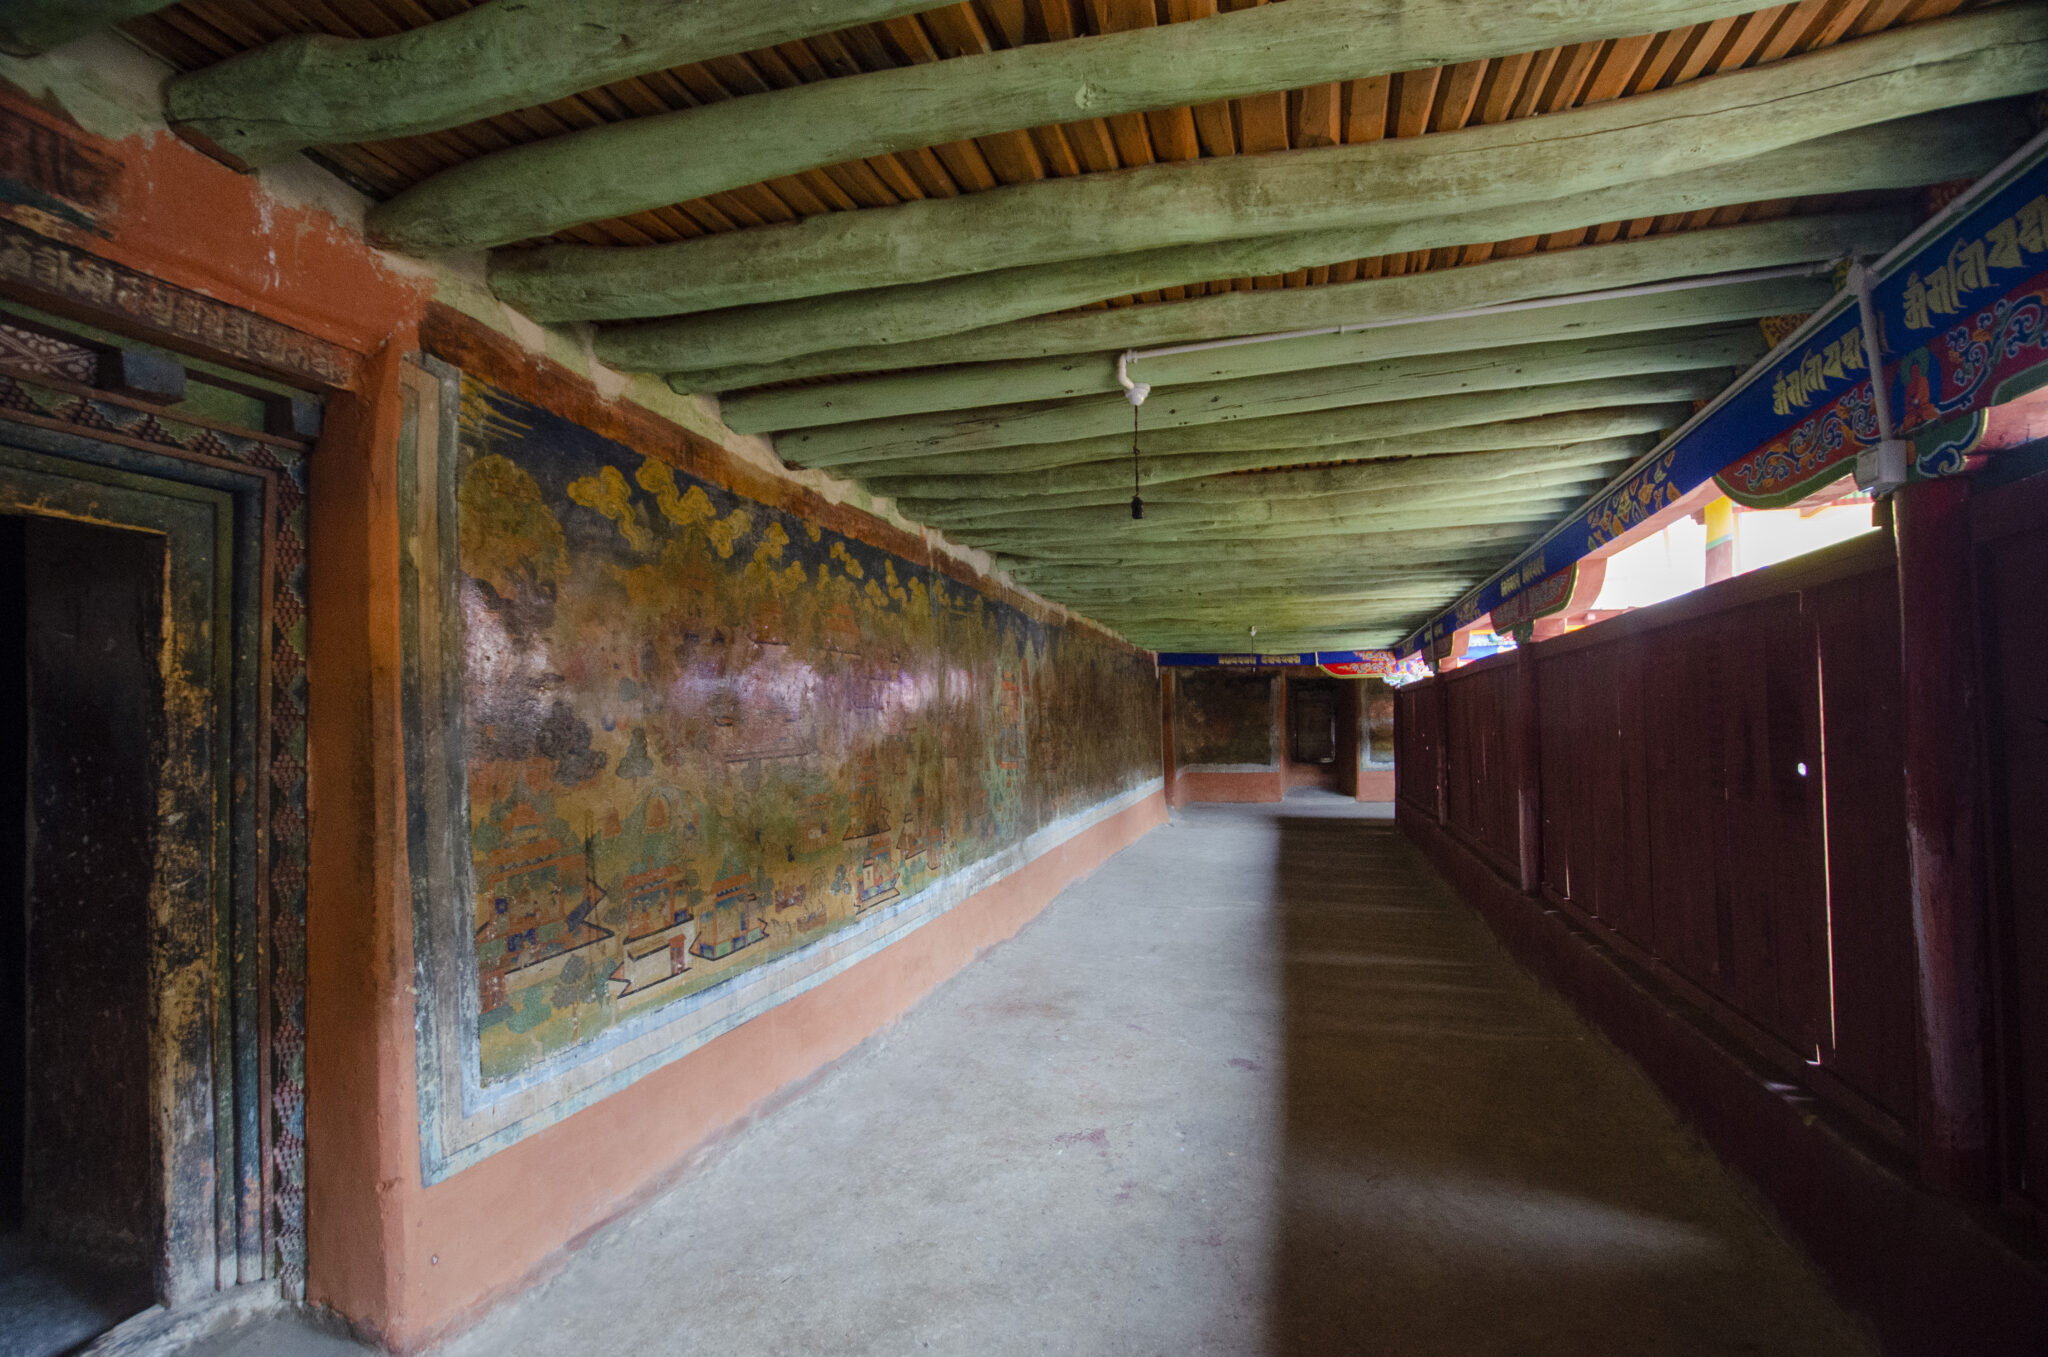 View down long, naturally lit corridor featuring green timber ceiling, mural at left, decorated eaves at right